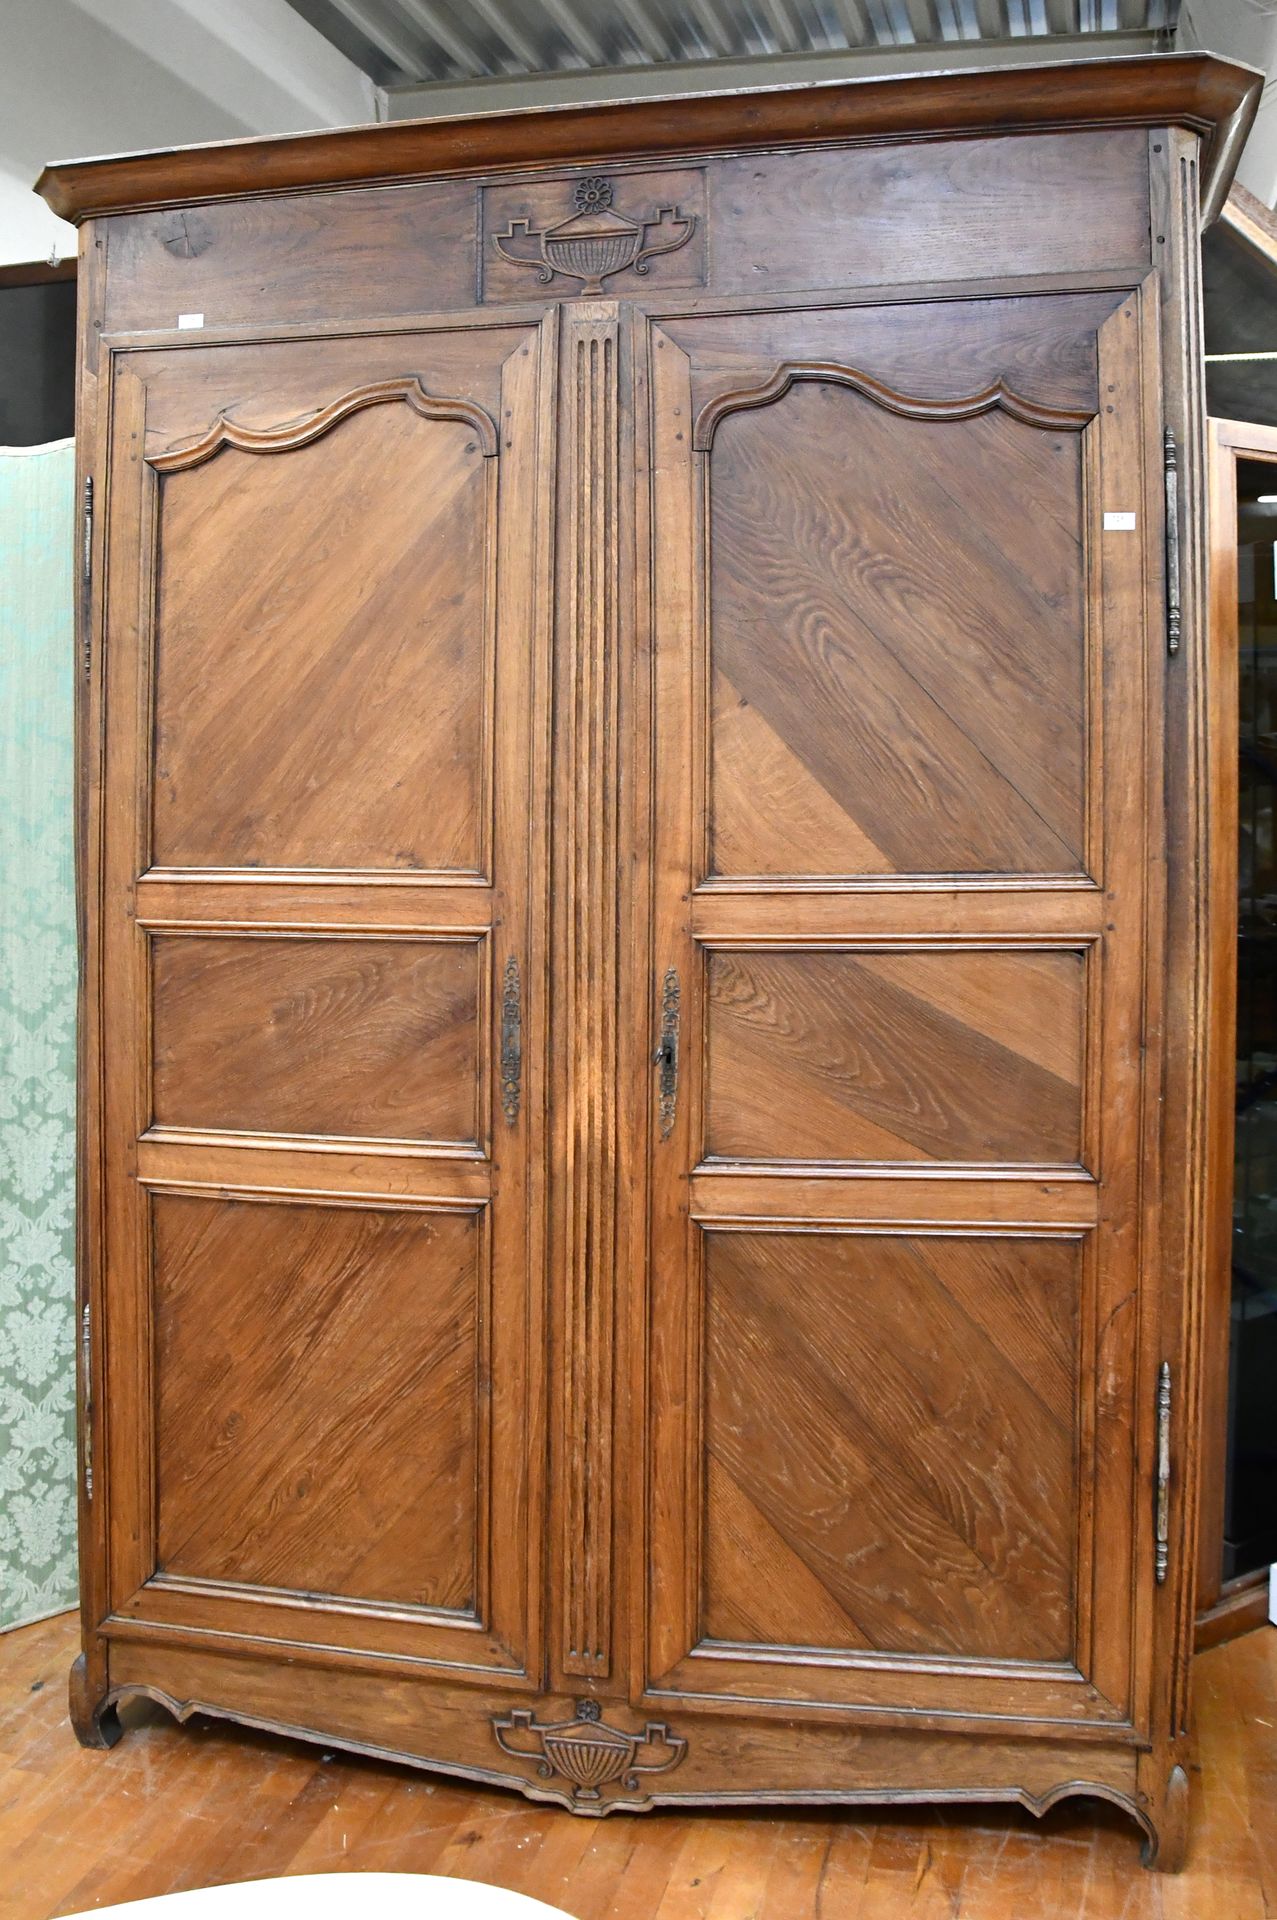 Null Late 18th century regional oak cabinet, opening with two panelled doors